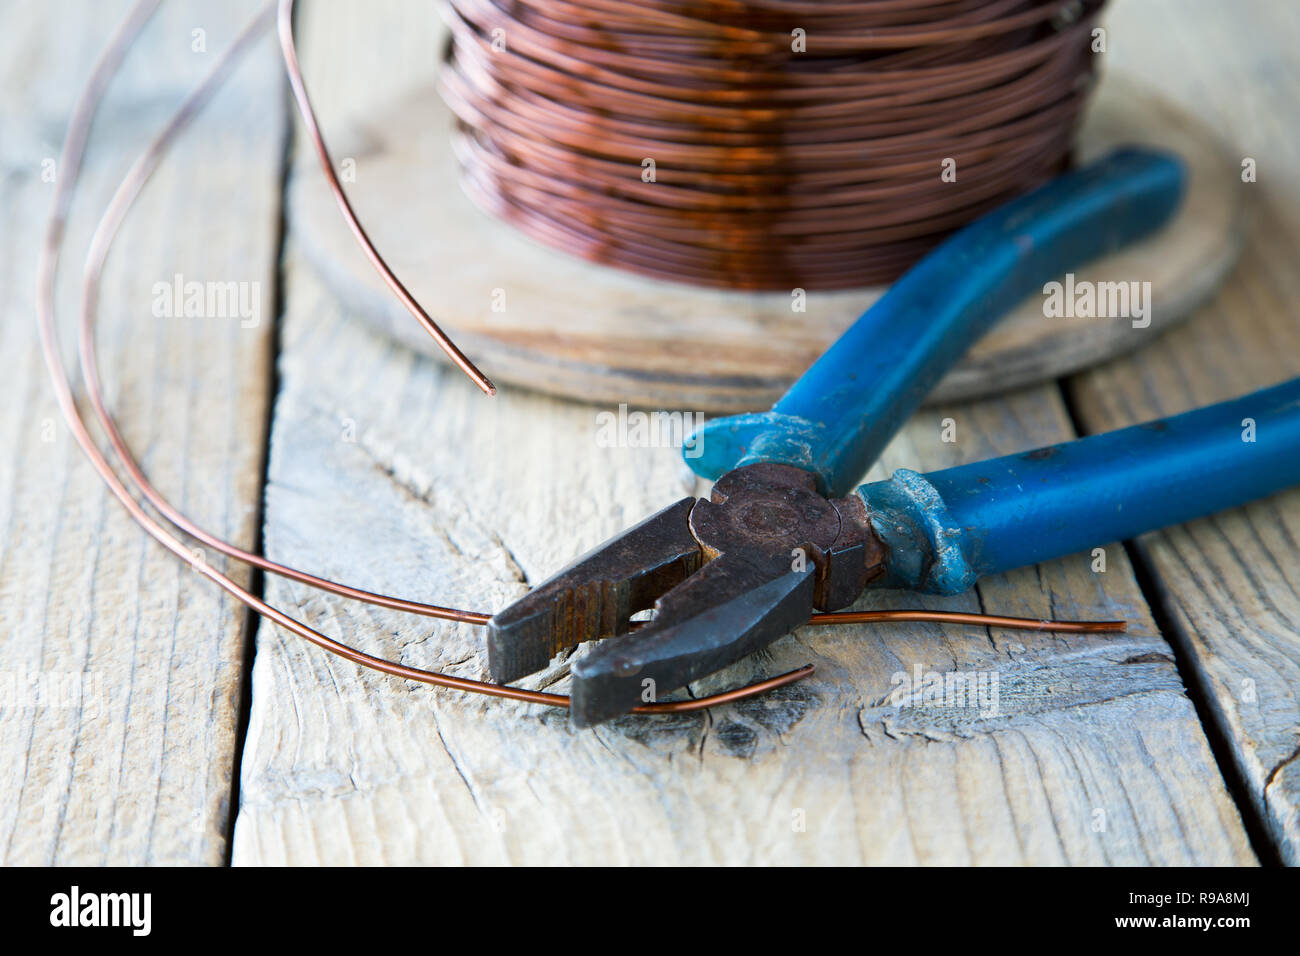 coil of copper wire and pliers close-up Stock Photo